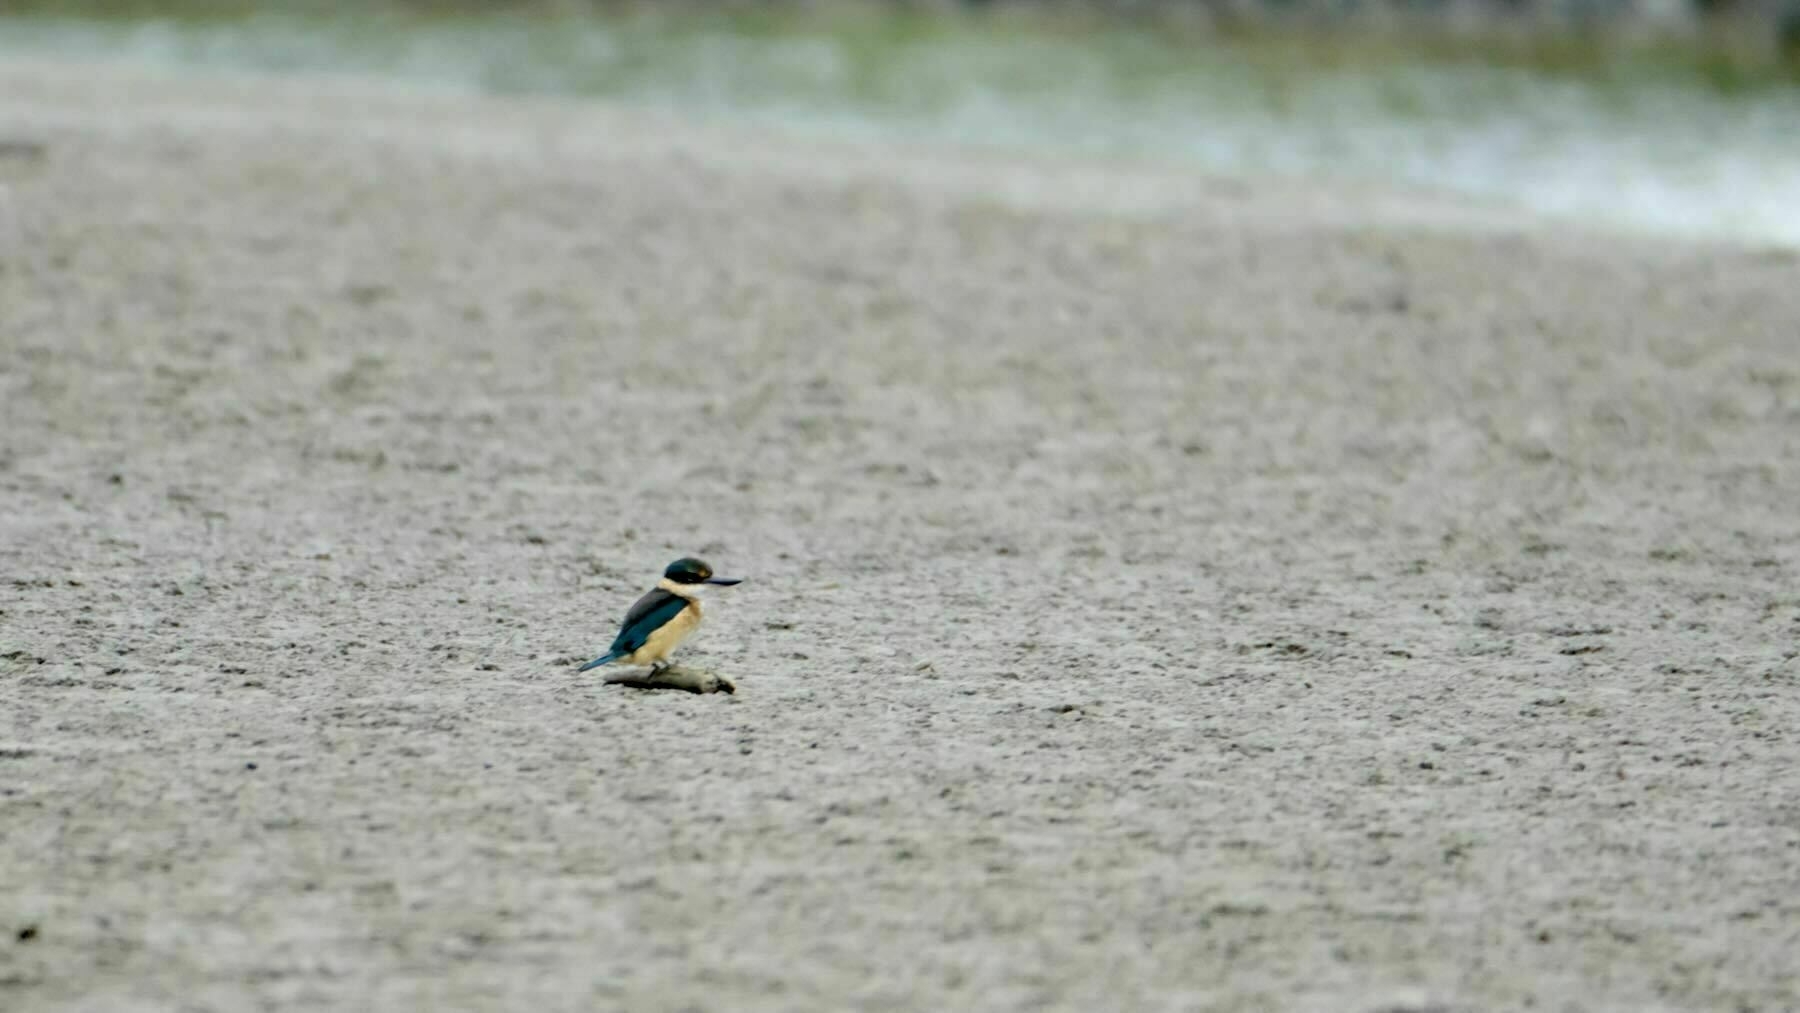 Small bird with blue head and back, yellow underparts and a chunky black bill, on the sand.  